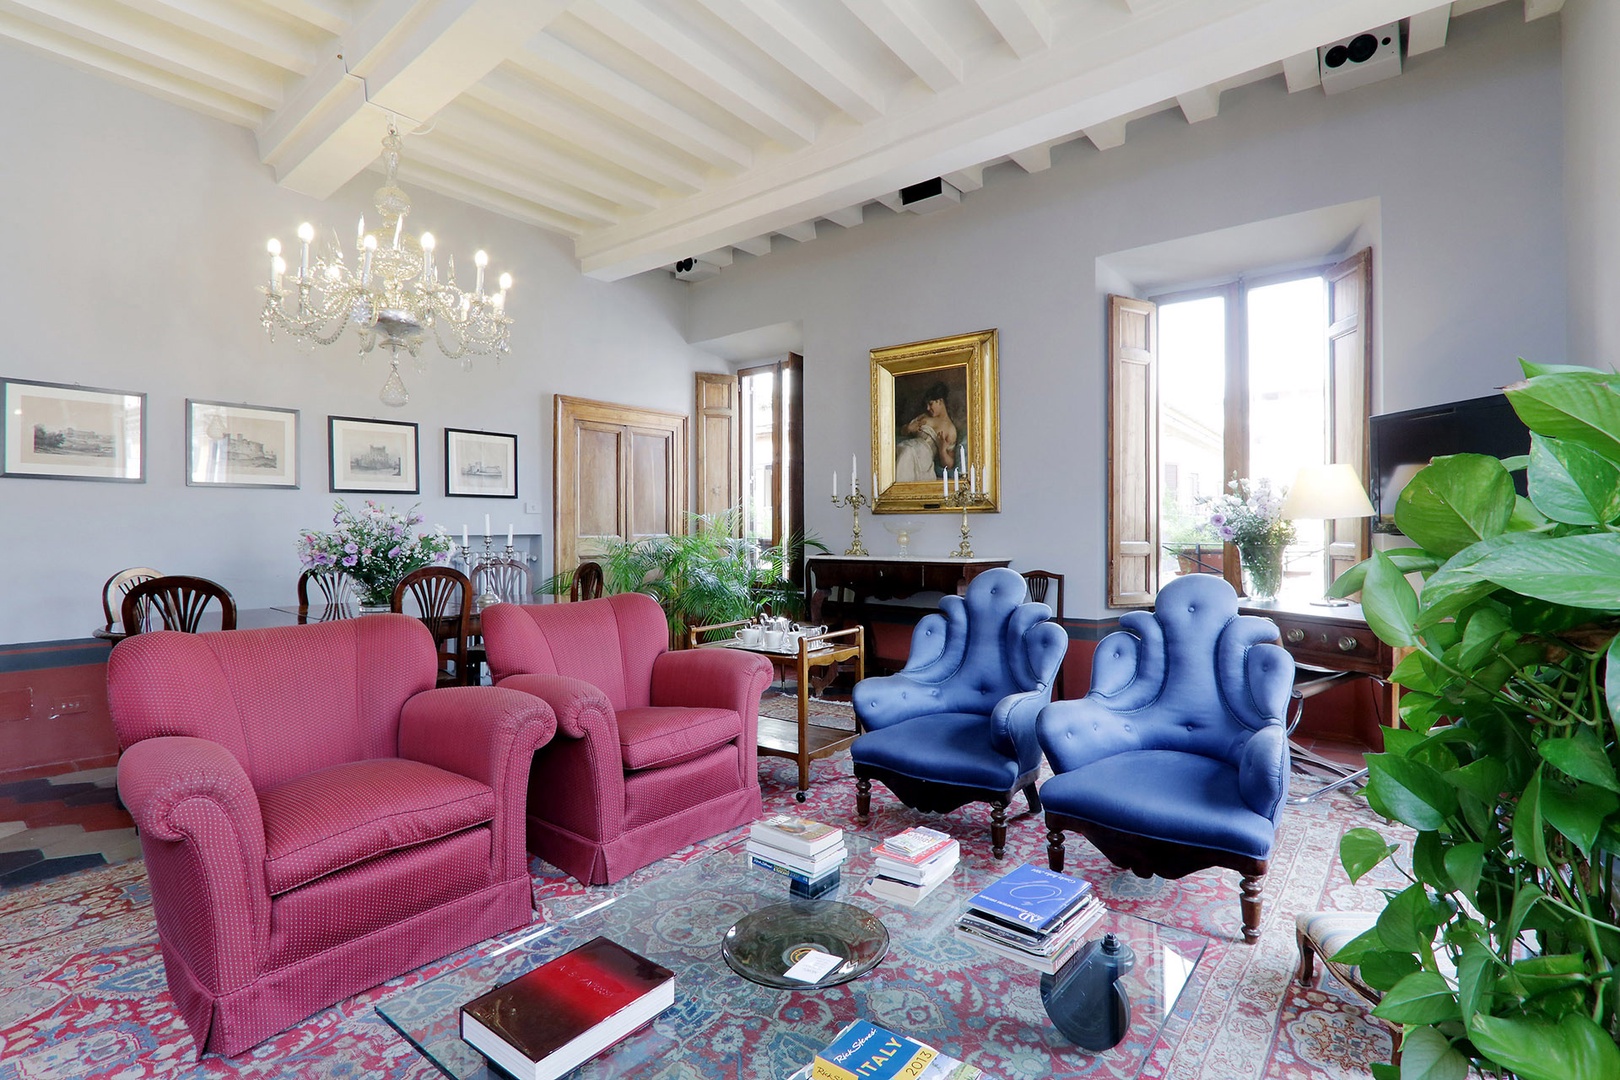 Enjoy the best that Rome has to offer, in one of the finest upscale streets in Rome's center.